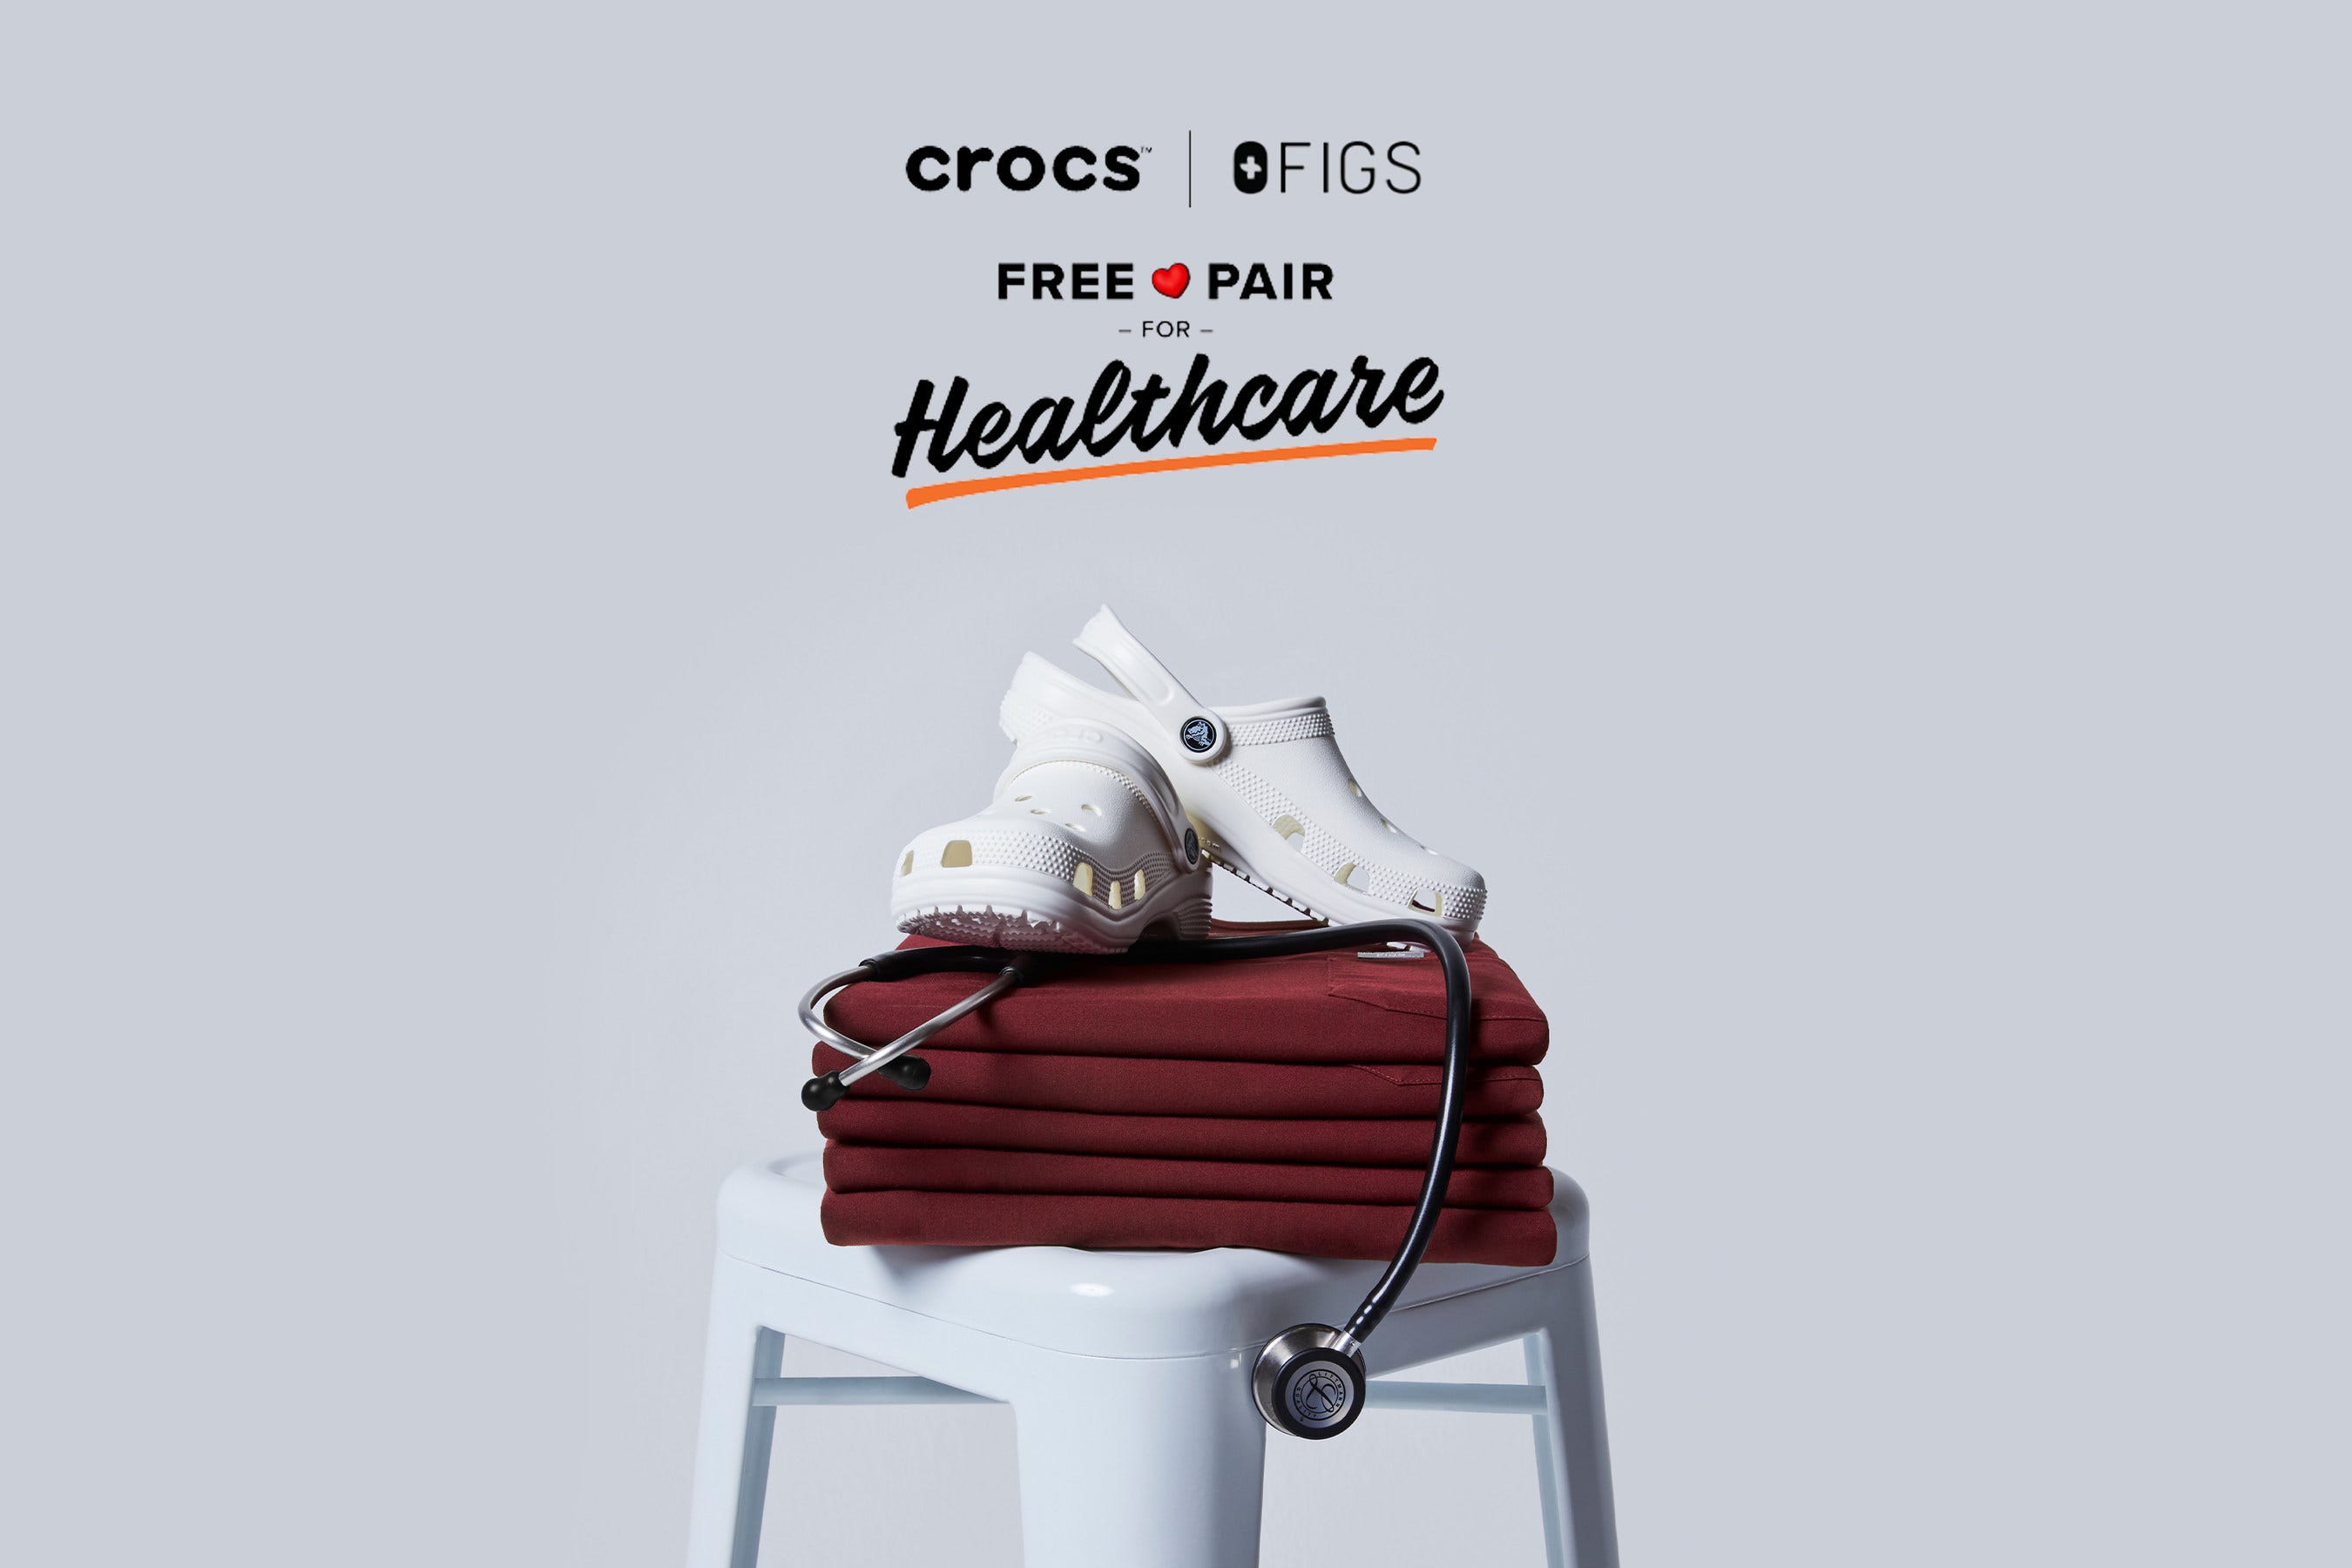 Crocs giving away 10,000 pairs of shoes, free scrubs for health care